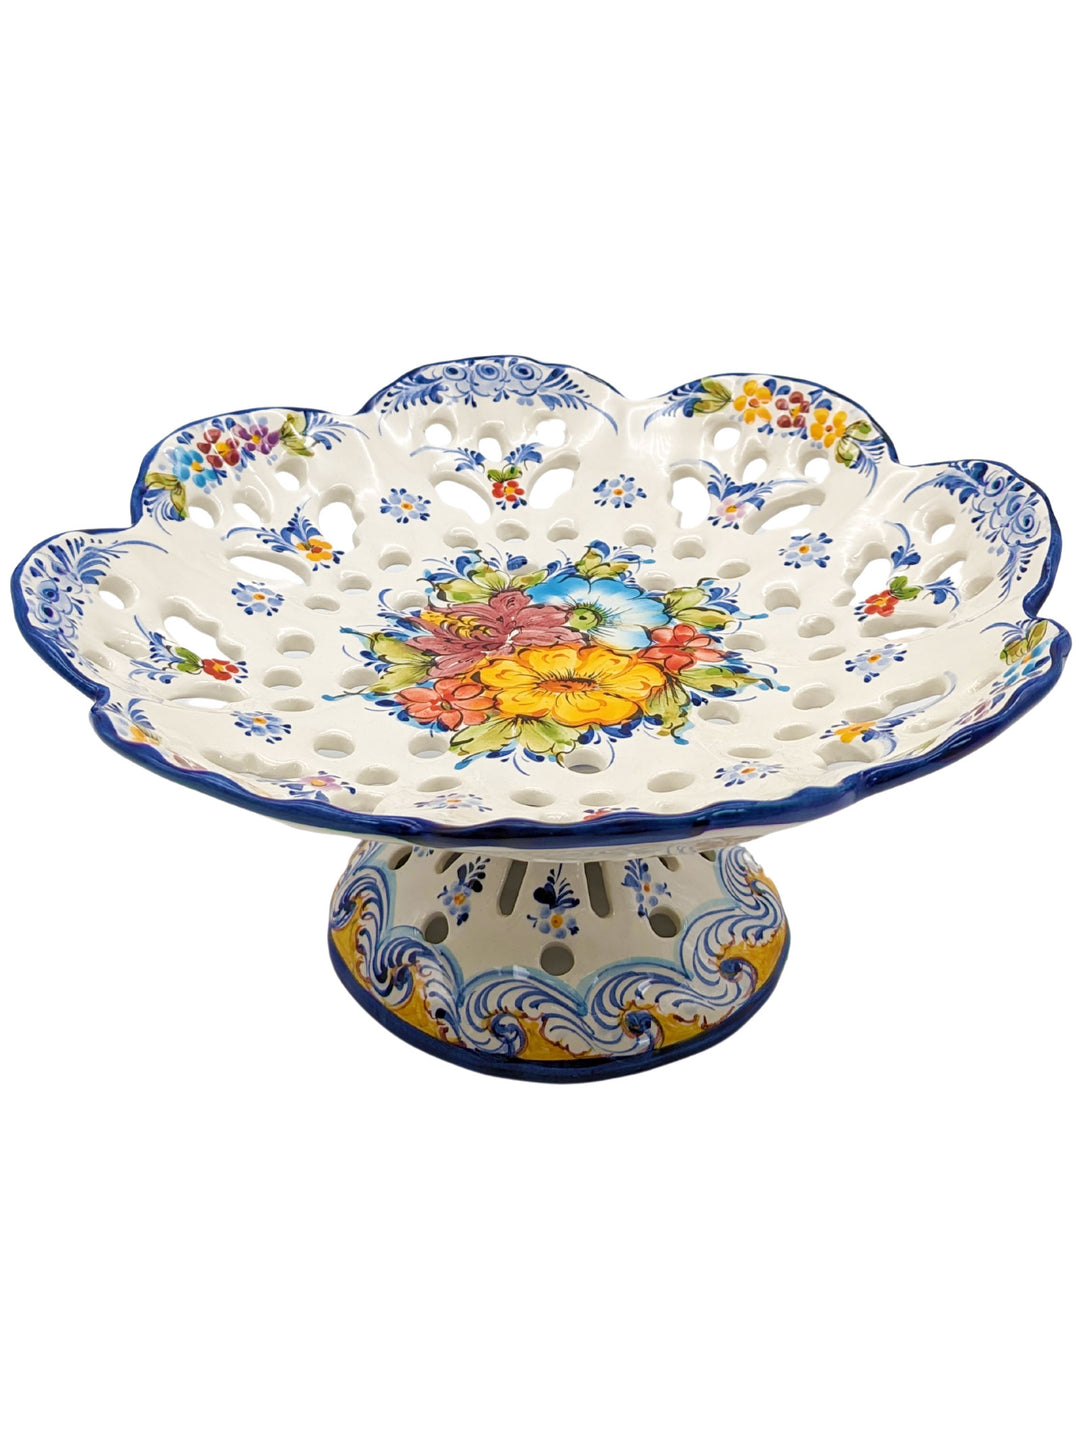 Hand Painted Portuguese Pottery Alcobaça Ceramic Footed Fruit Bowl